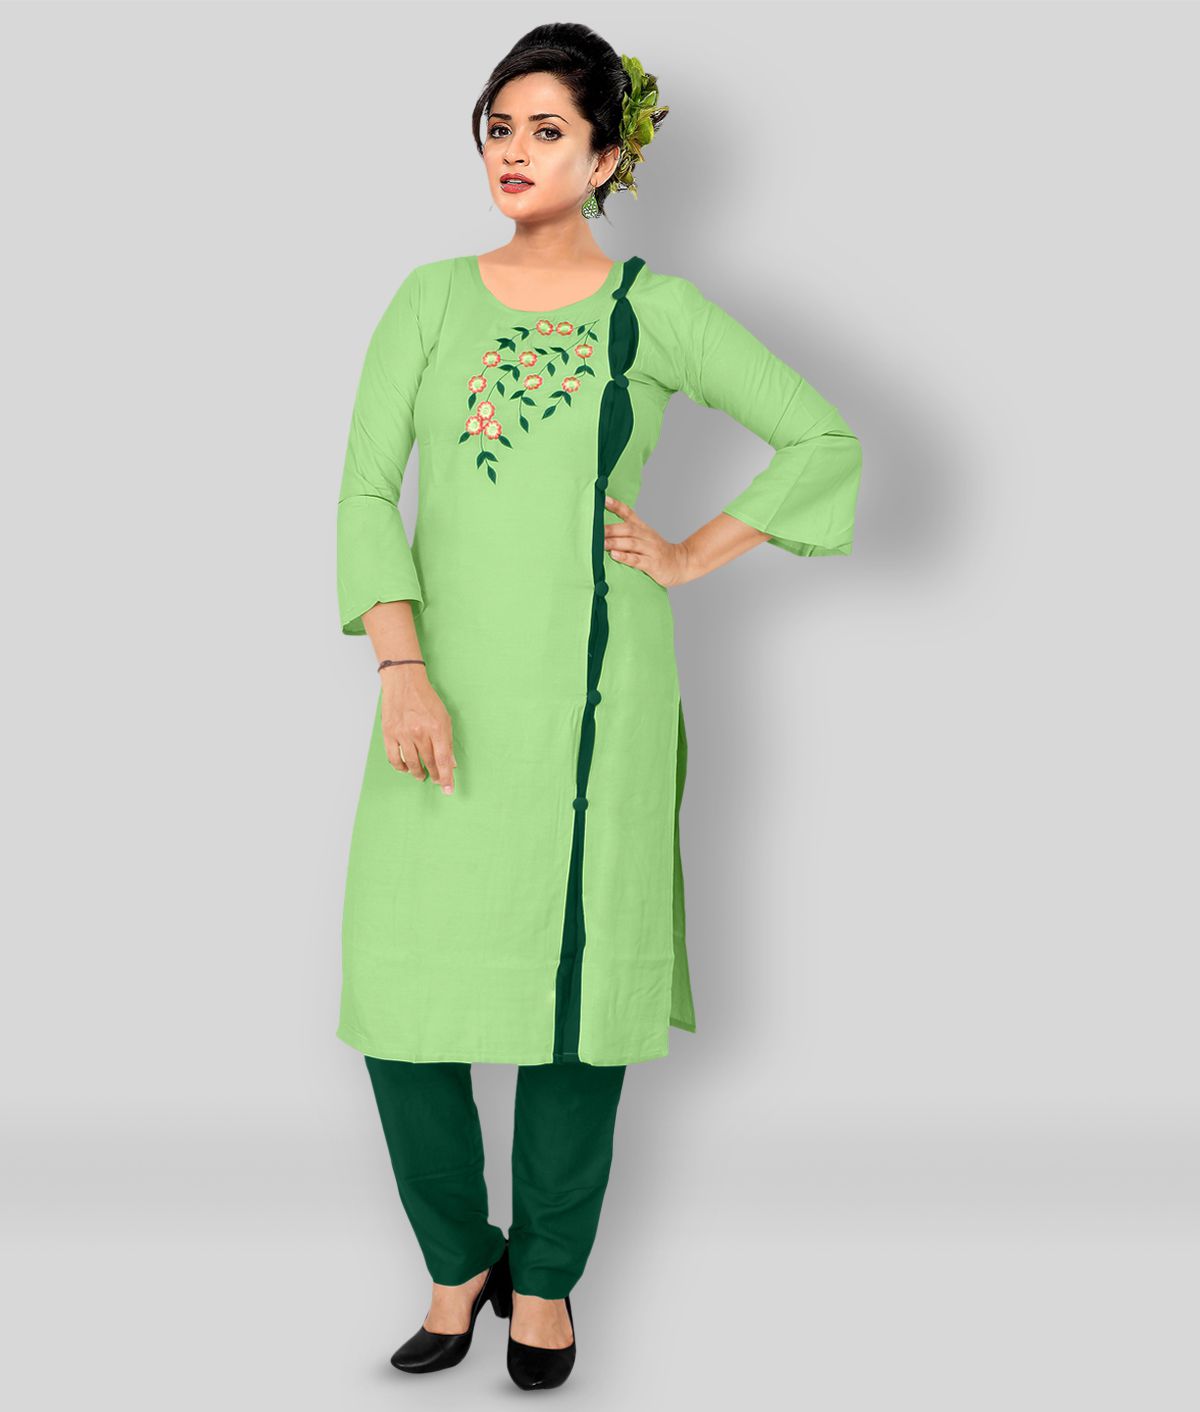     			HAYA - Mint Green Straight Rayon Women's Stitched Salwar Suit ( Pack of 1 )